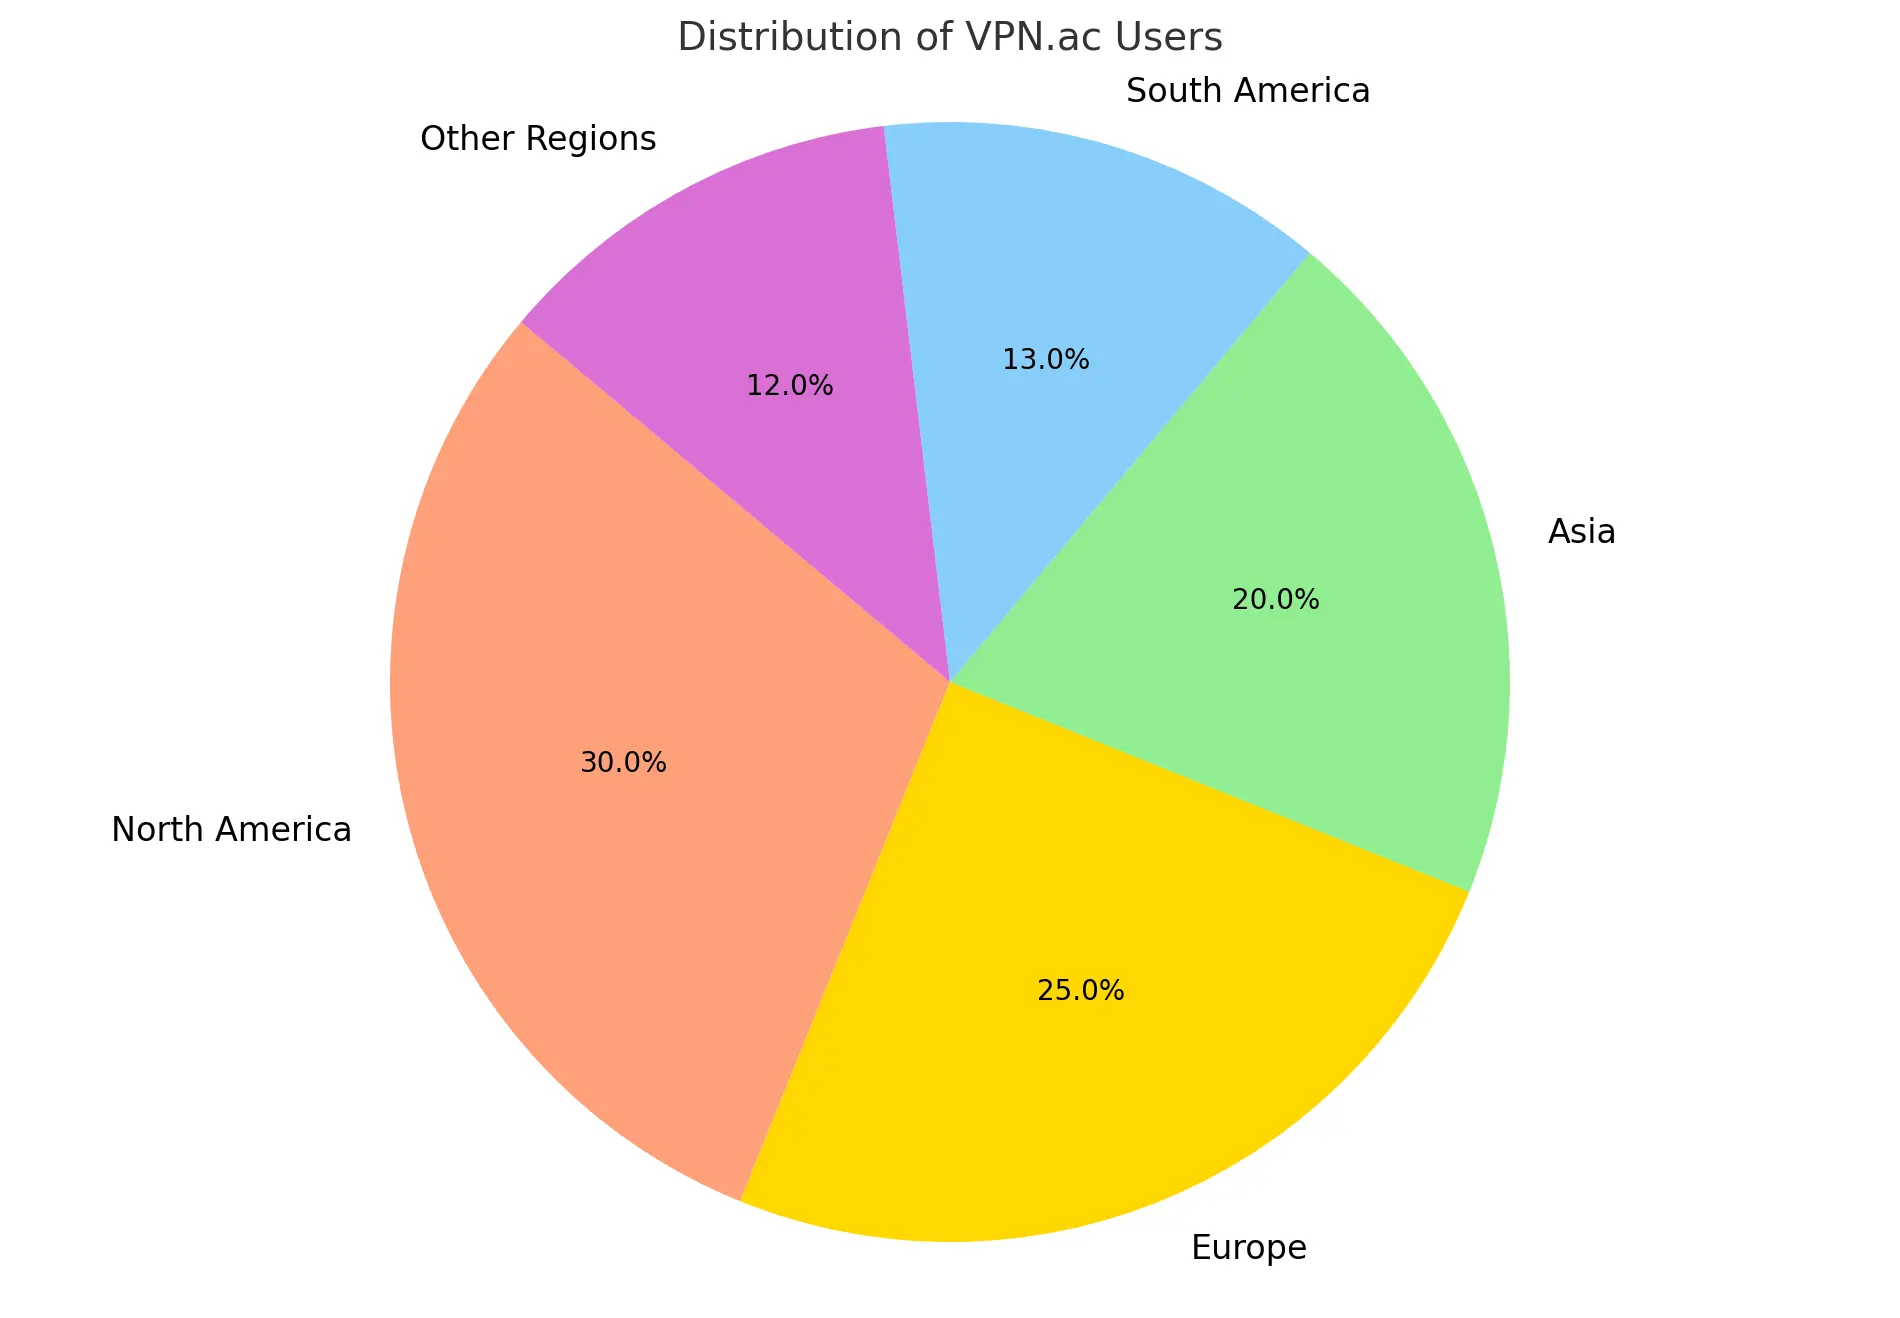 Distribution of VPN.ac Users